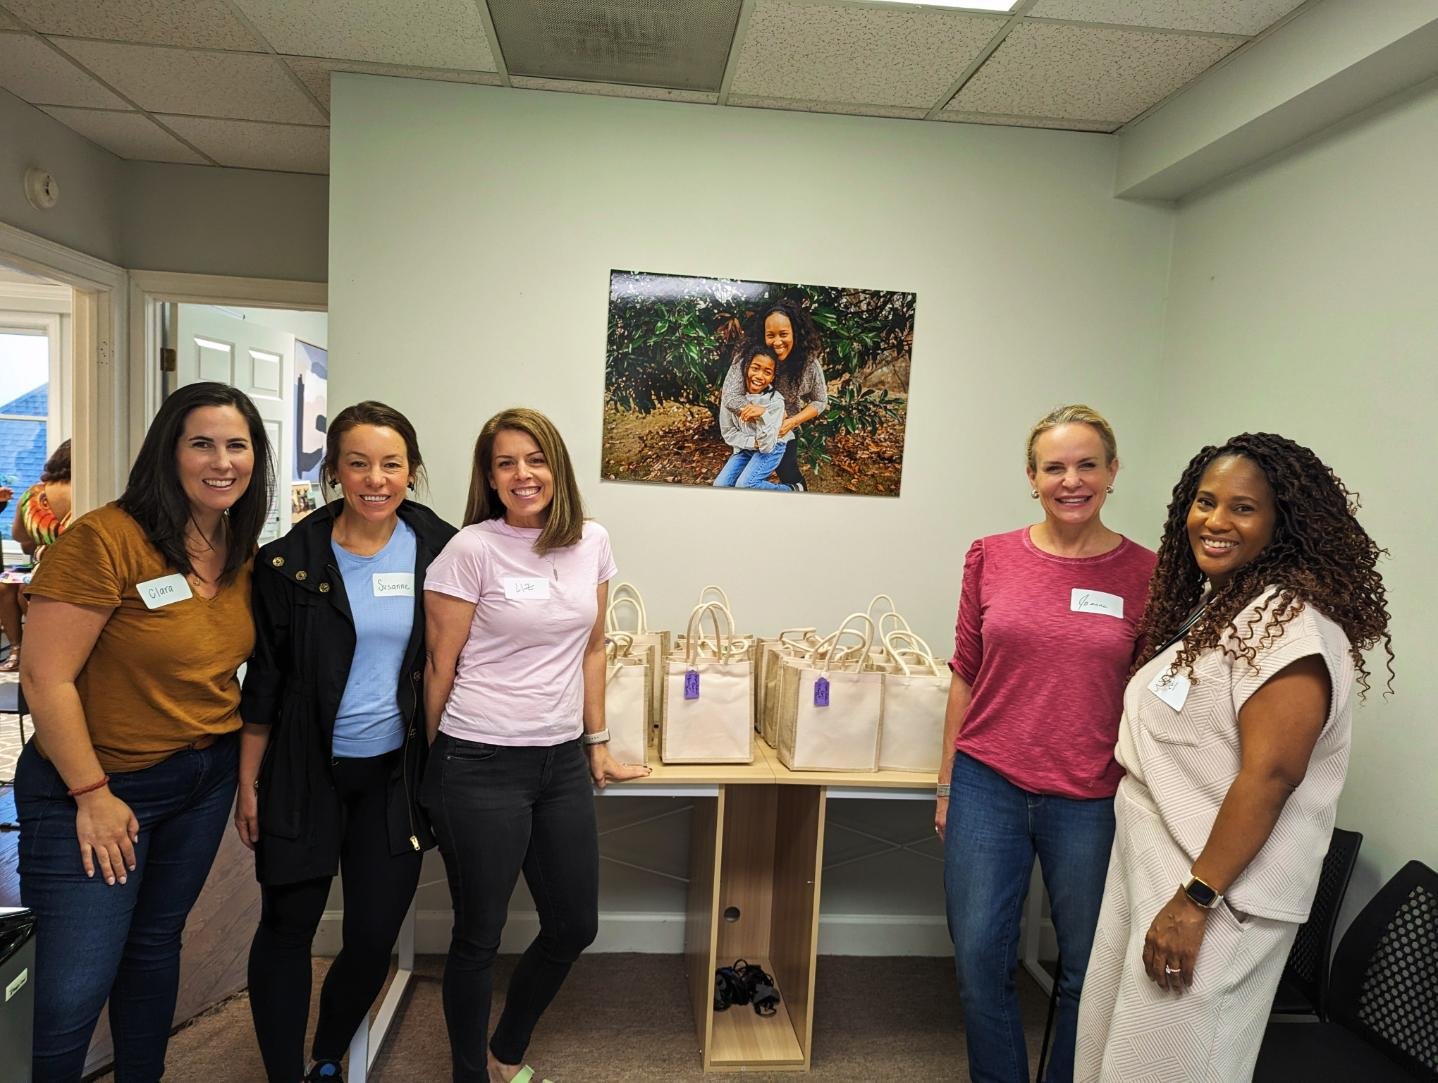 We had a successful Mother's Day event yesterday, thanks to our friends over at @bloom.atl 🙌
They curated these very thoughtful gift bags for our moms, and also set up lunch and snacks for them to enjoy! All current and alumni moms were invited, and